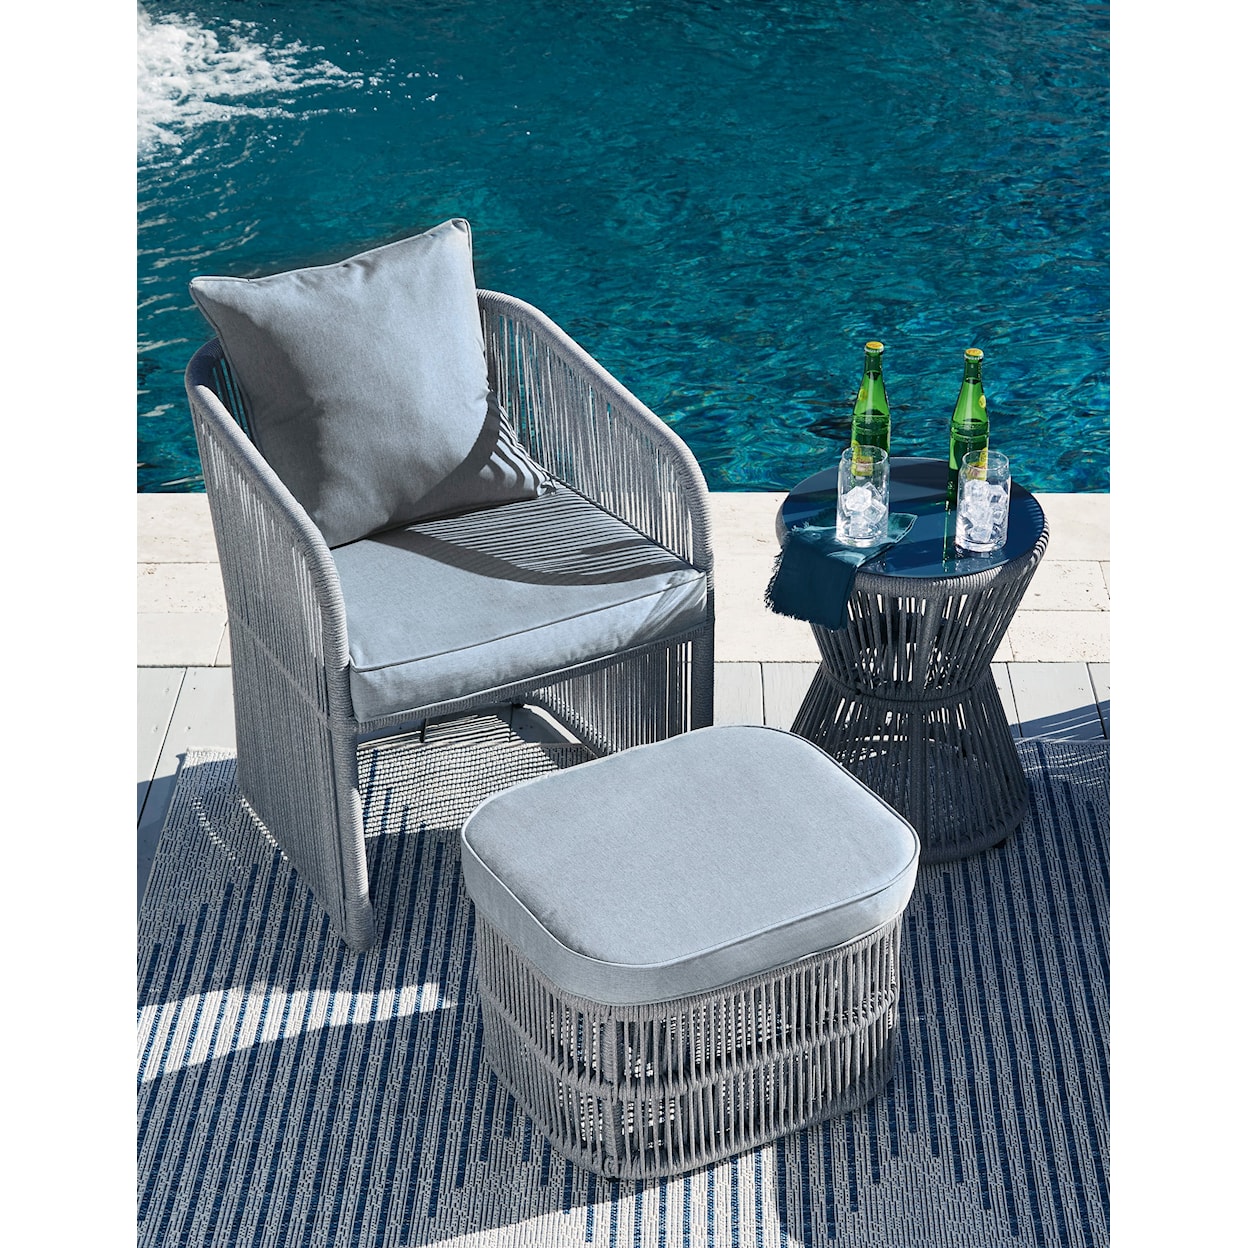 Ashley Furniture Signature Design Coast Island Outdoor Chair with Ottoman and Side Table